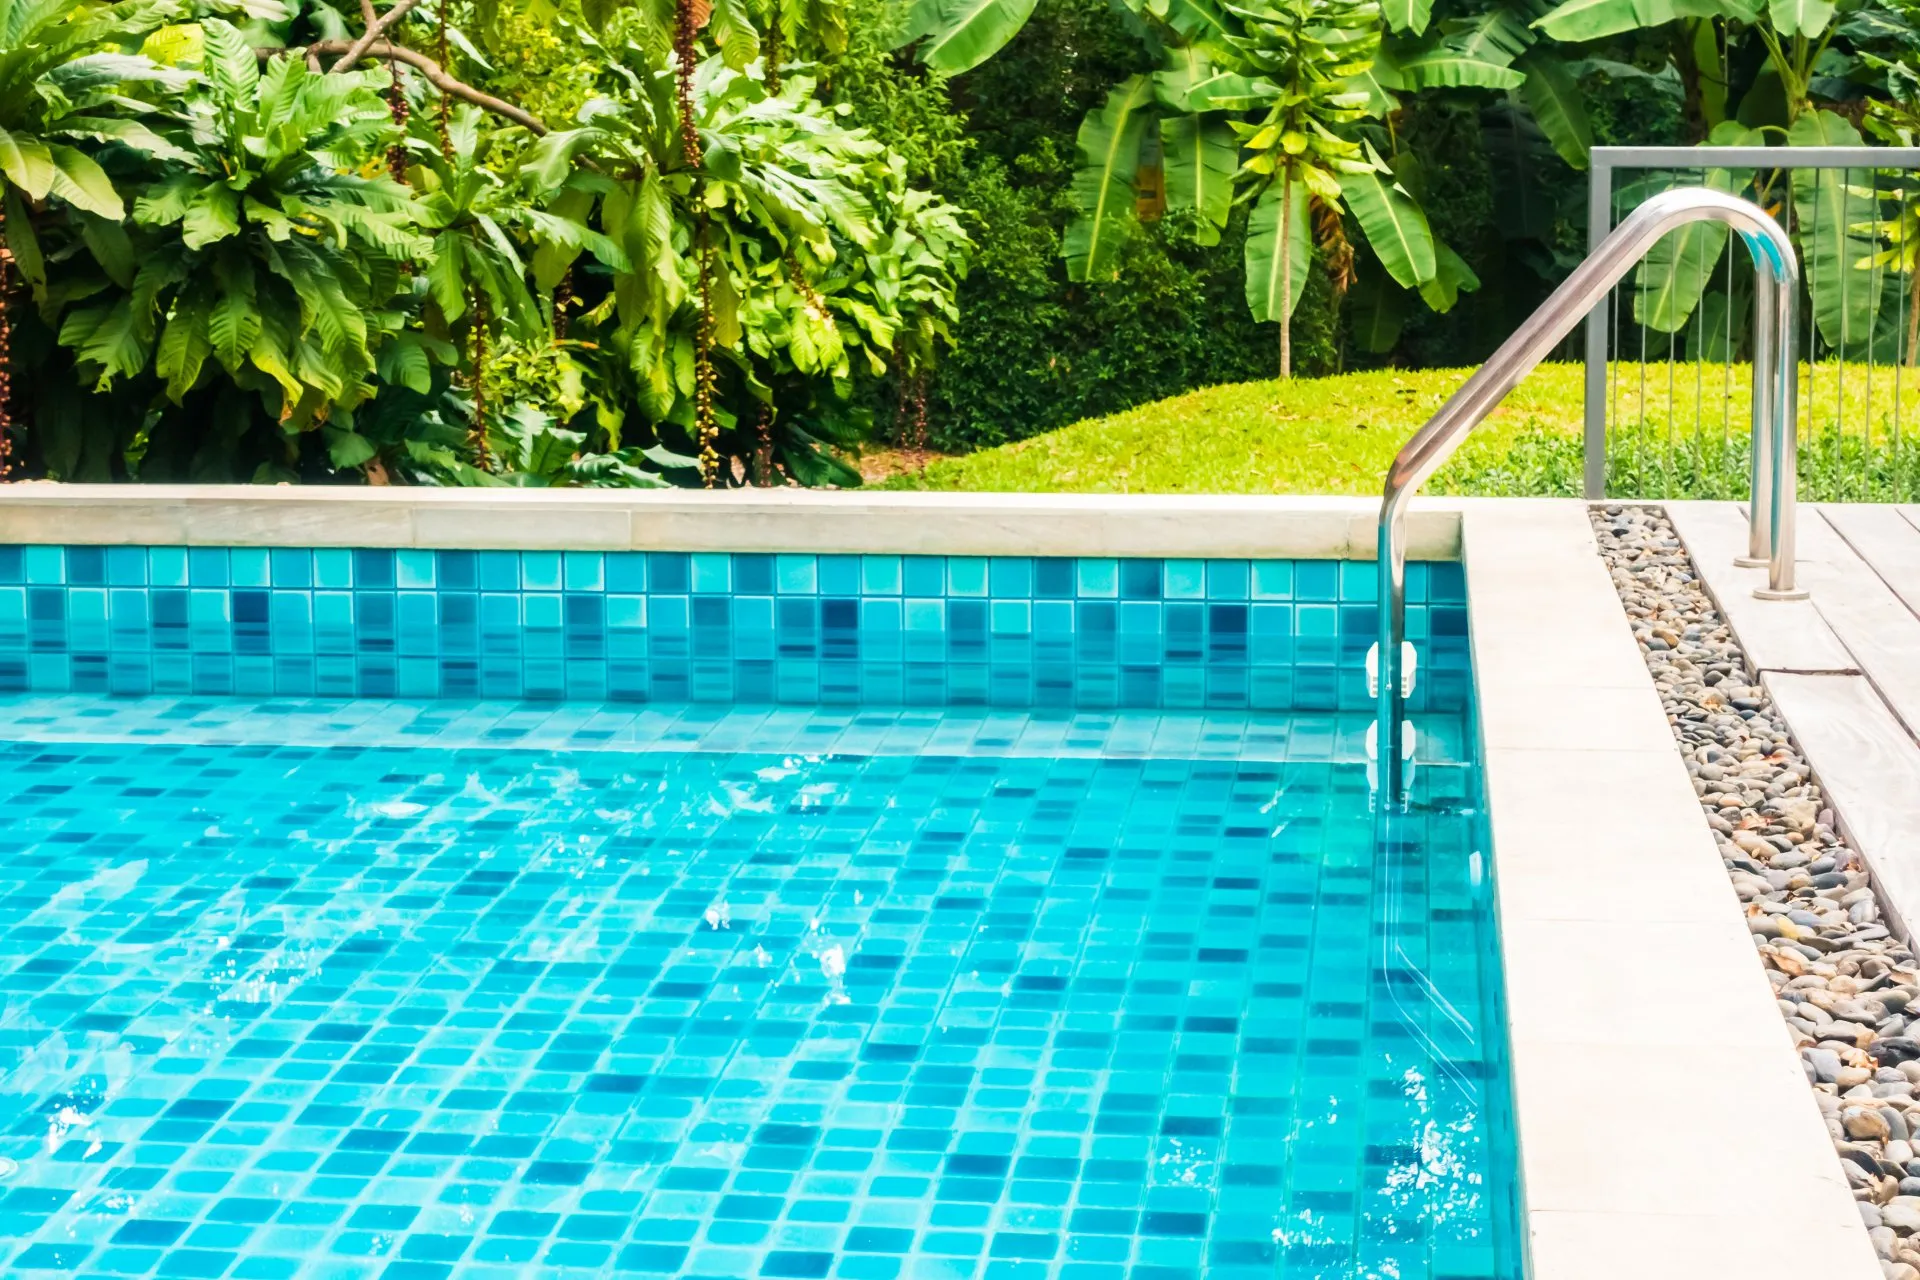 Pool Tile at the Waterline: A Simple Way to Keep Your Pool Clean